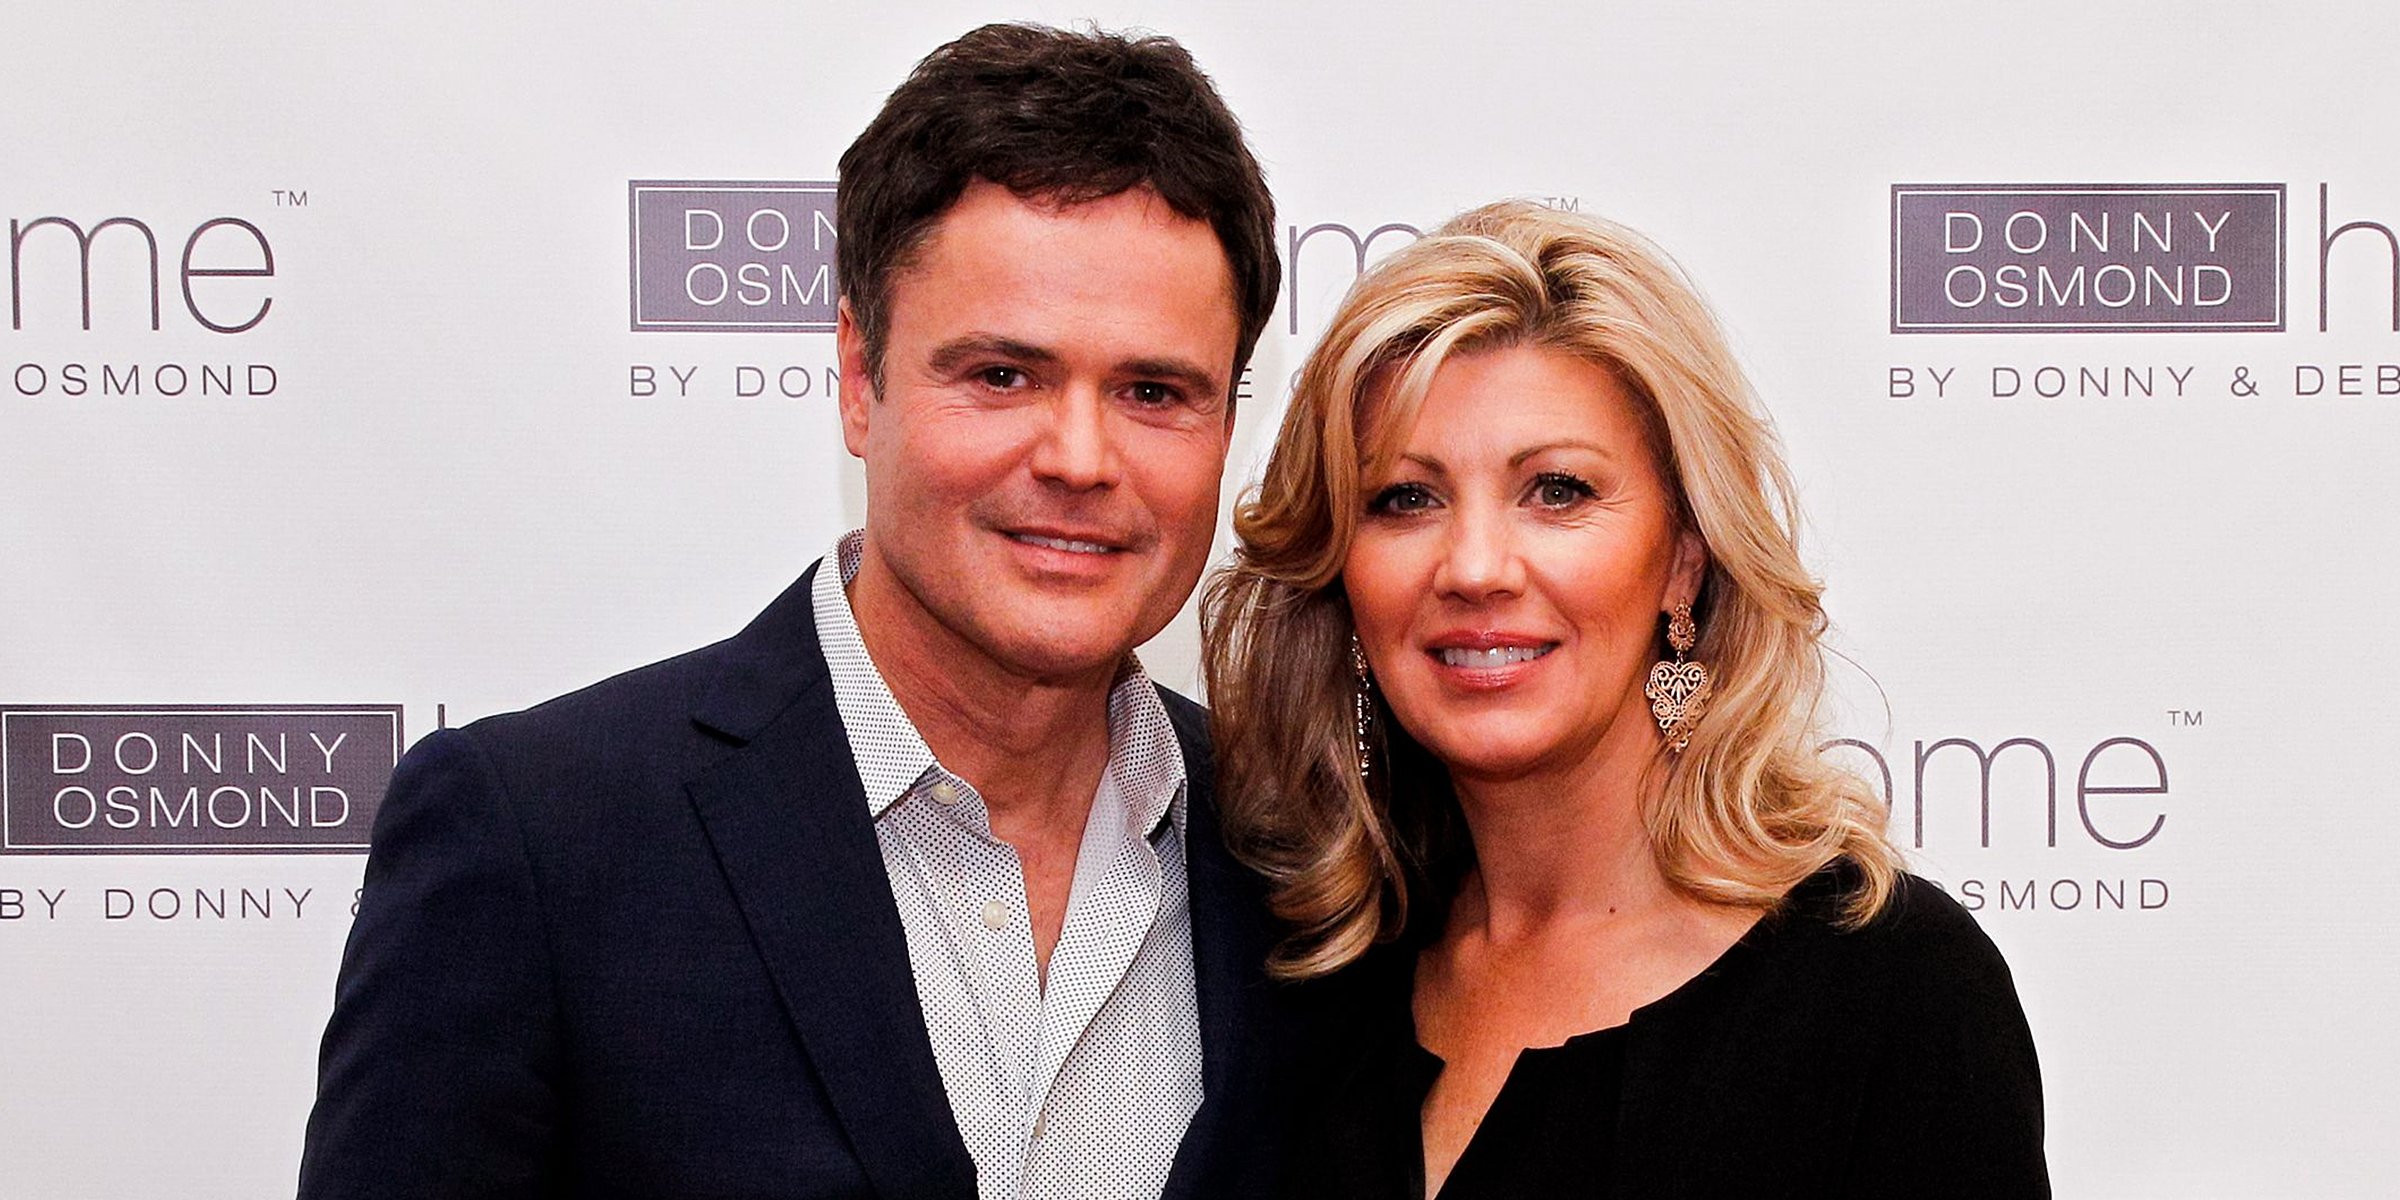 Is Donny Osmond Still Married? Check Out His Age, Wife, Parents, and More